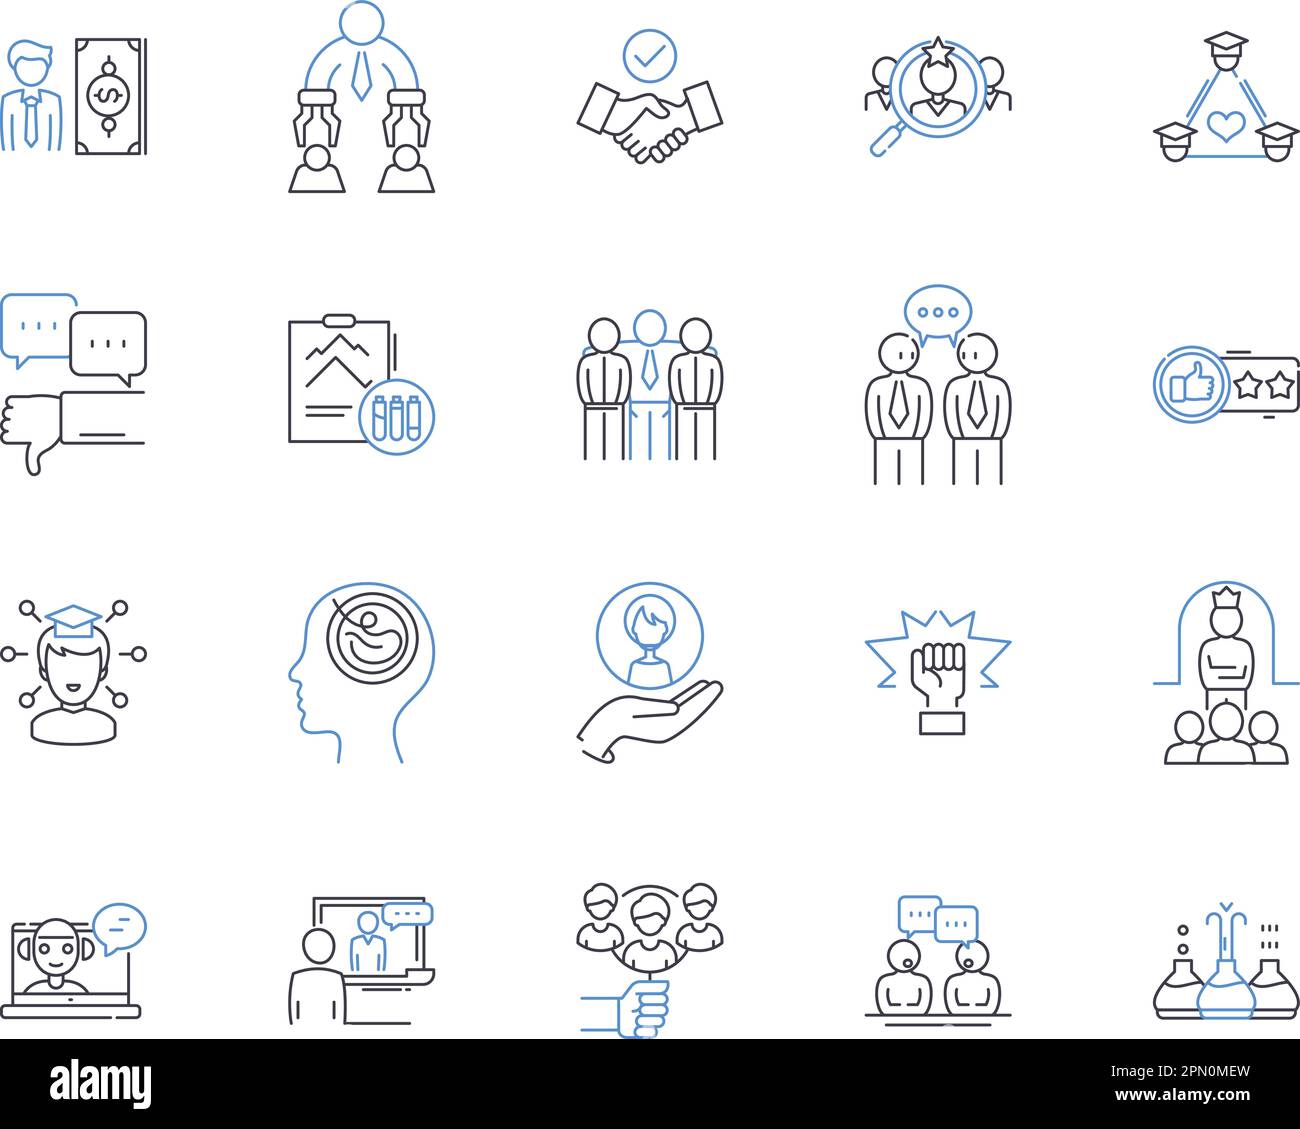 Startup education outline icons collection. Entrepreneurship, Incubation, Venture, Funding, Mentorship, Marketing, Networking vector and illustration Stock Vector